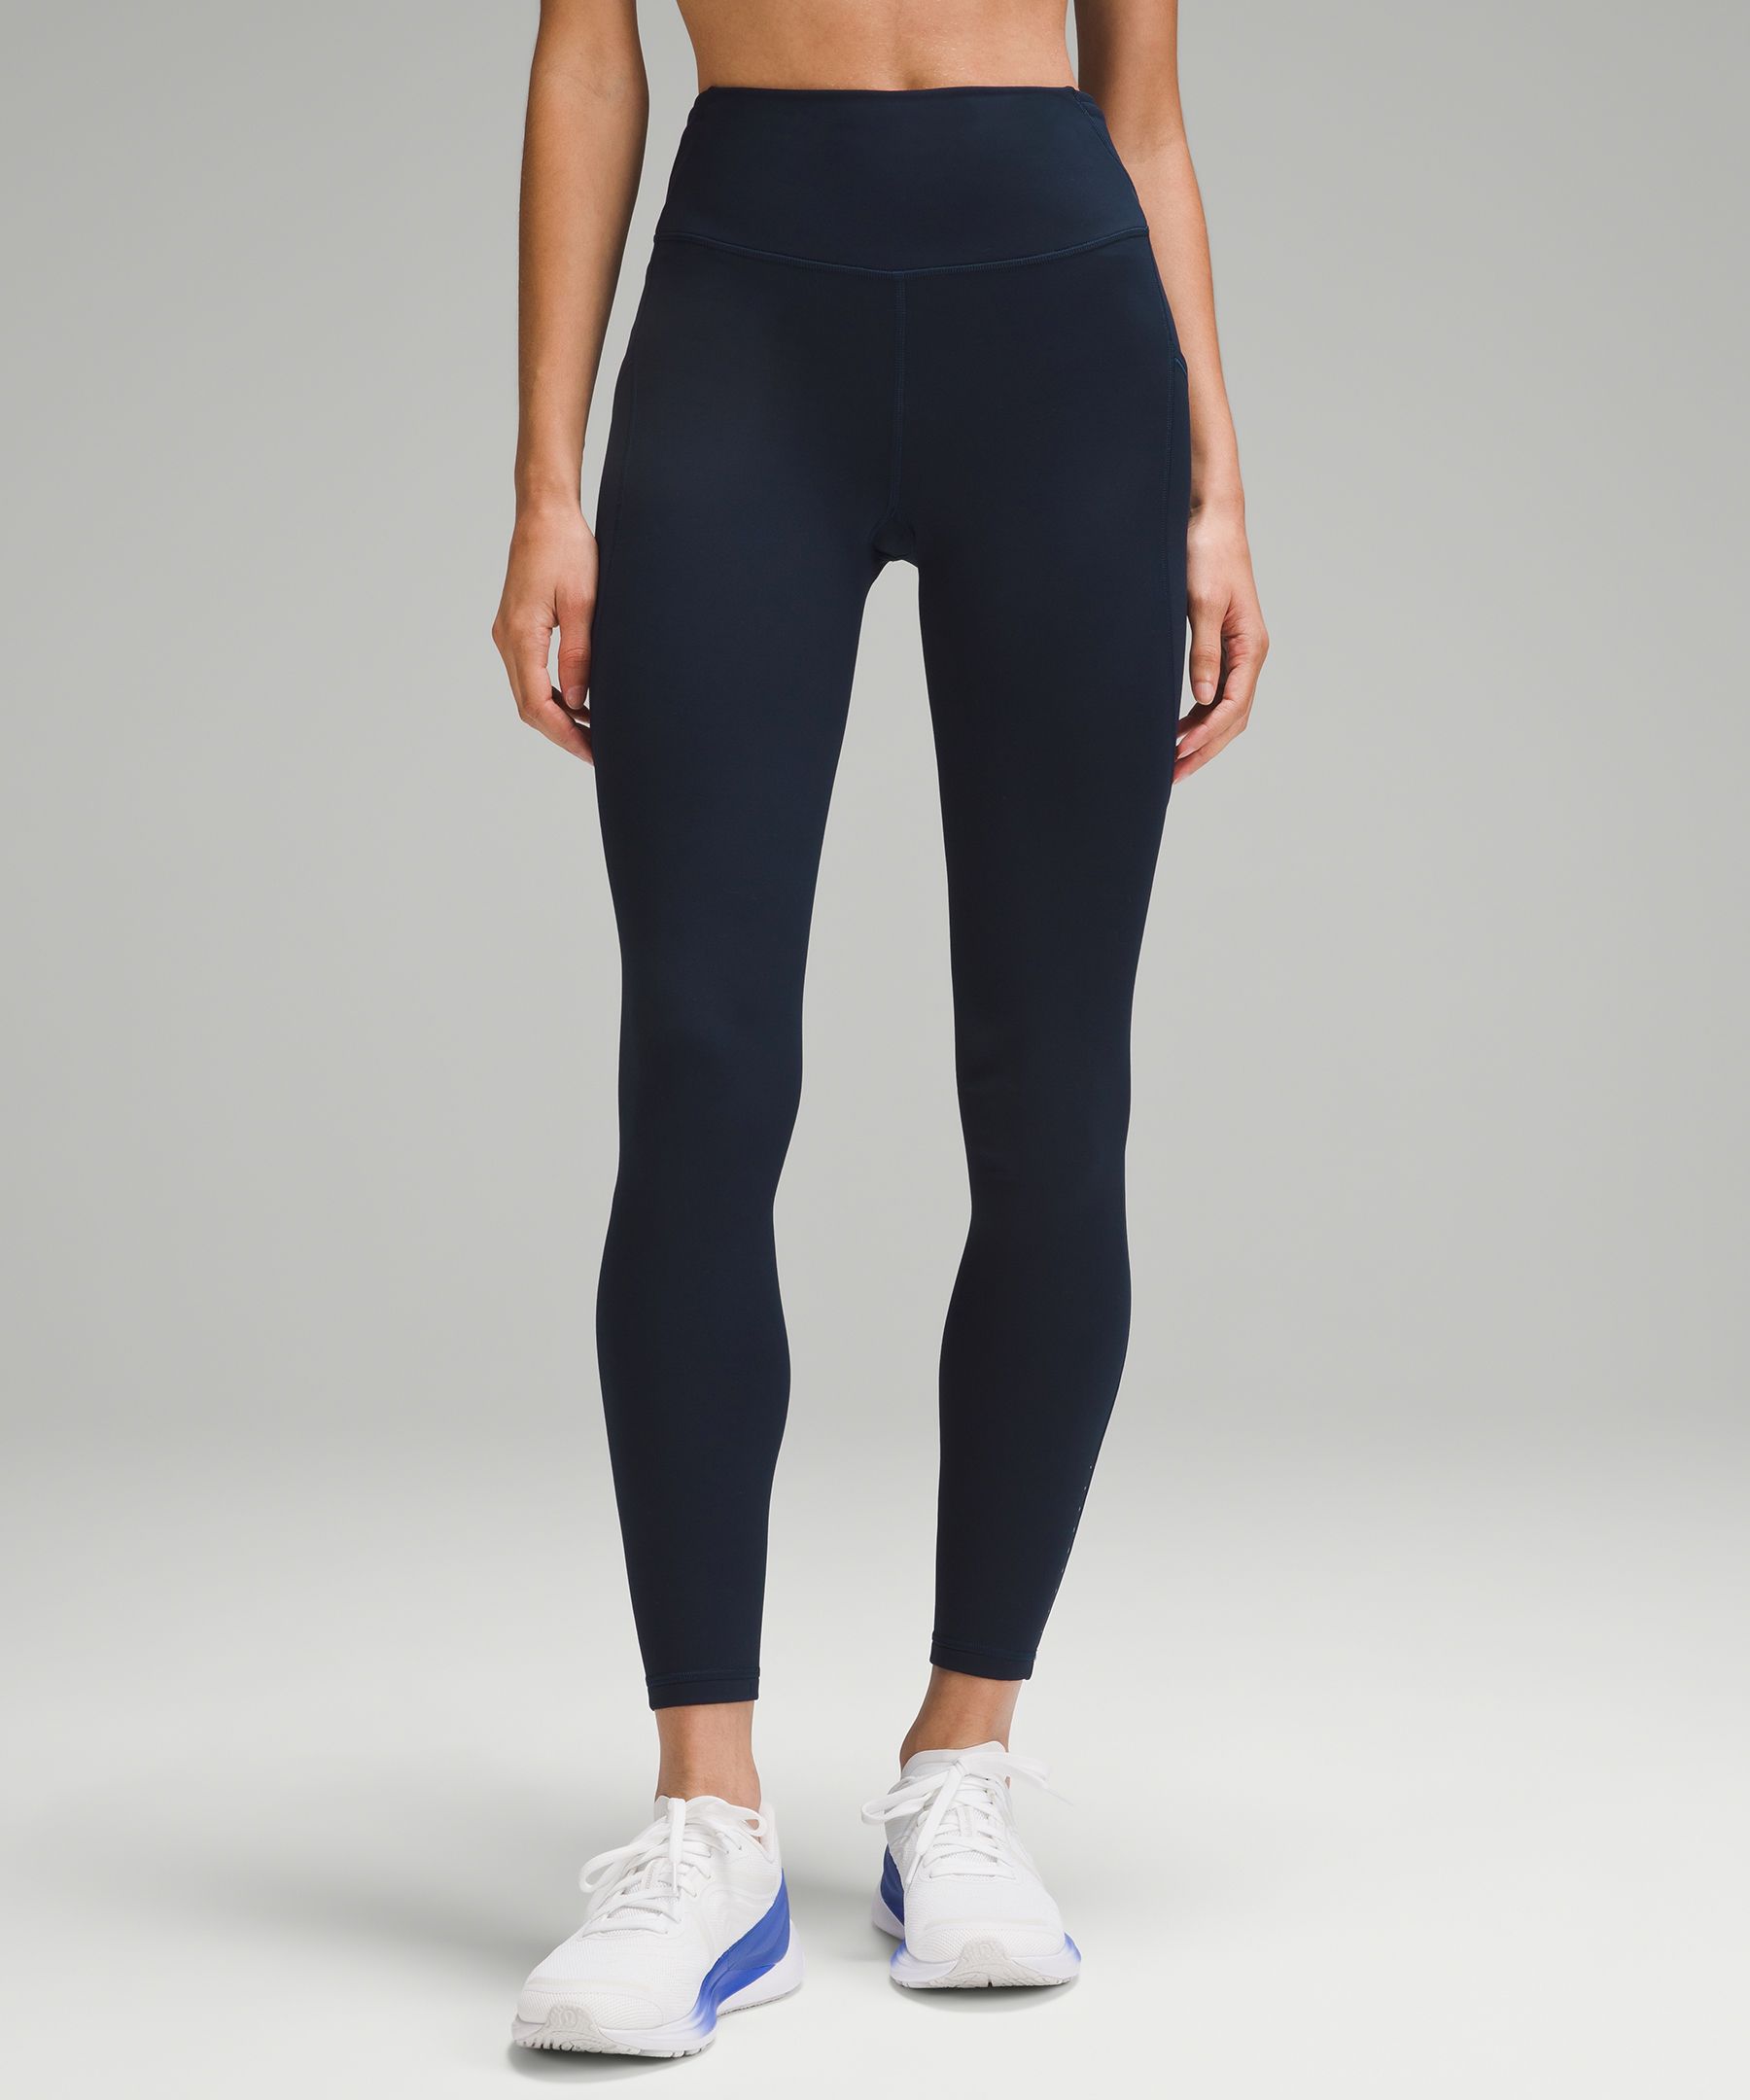 Lululemon Fast and Free High-Rise Fleece Tight 28